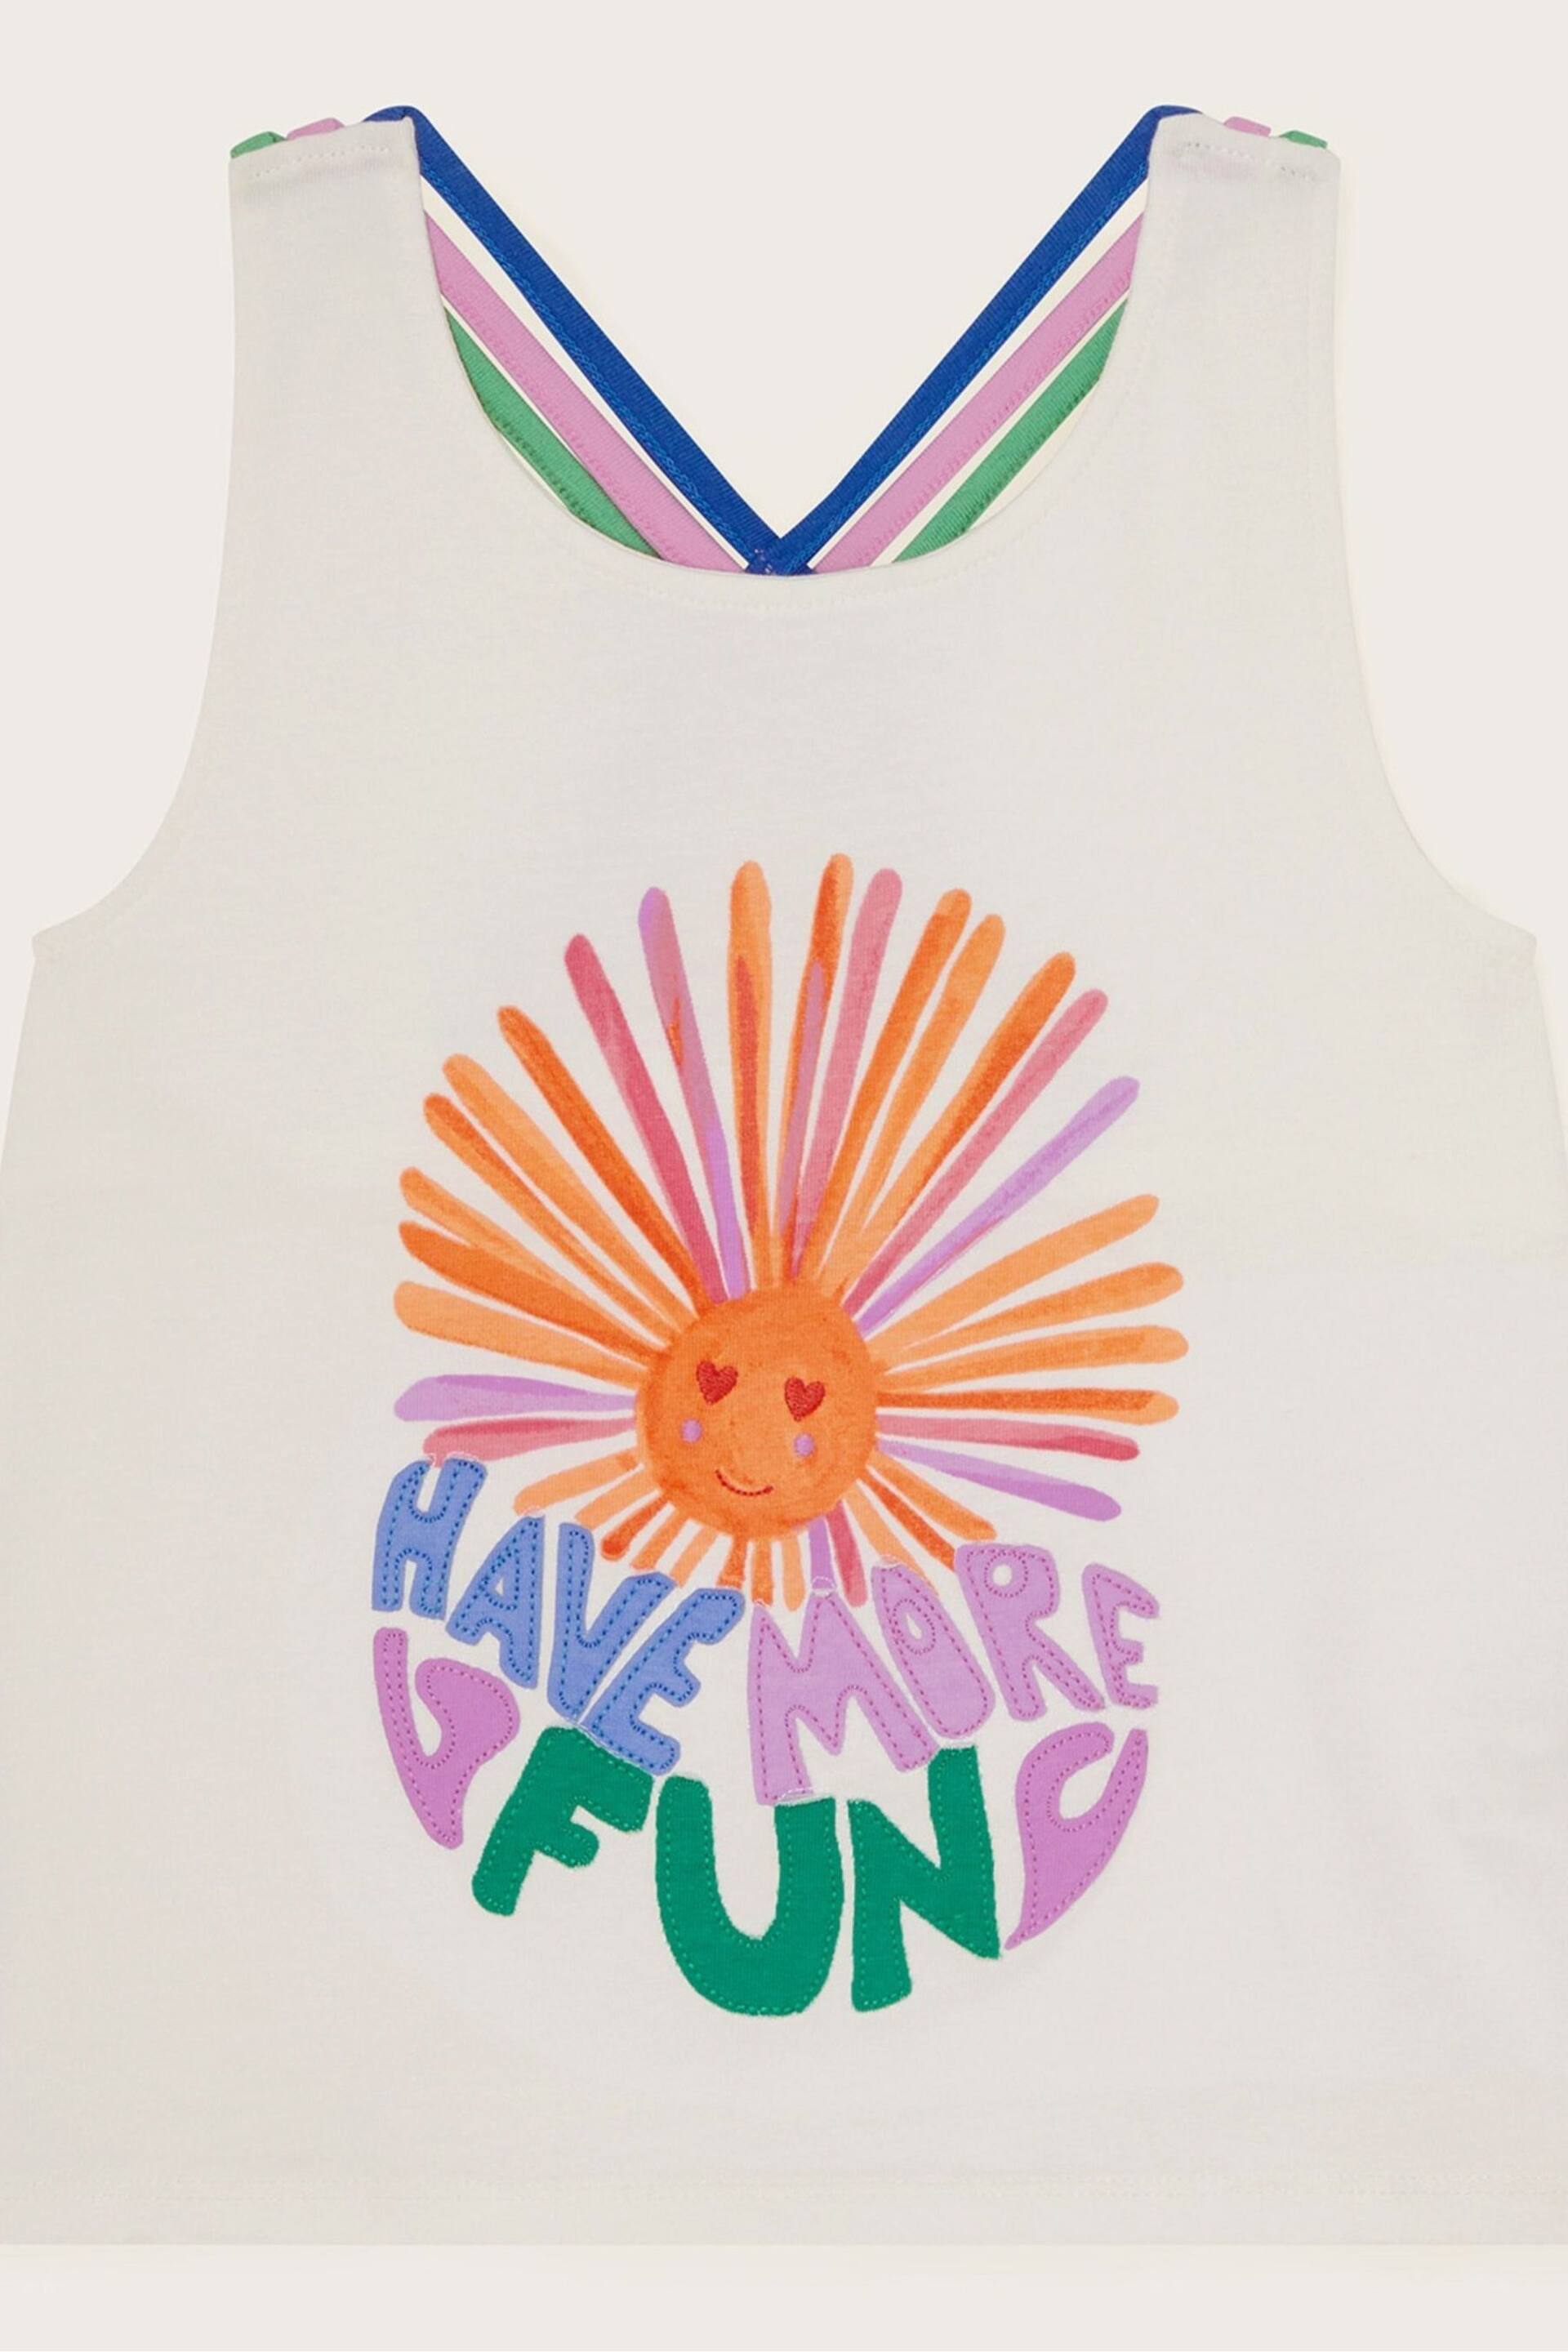 Monsoon Natural Have More Fun Vest - Image 1 of 3